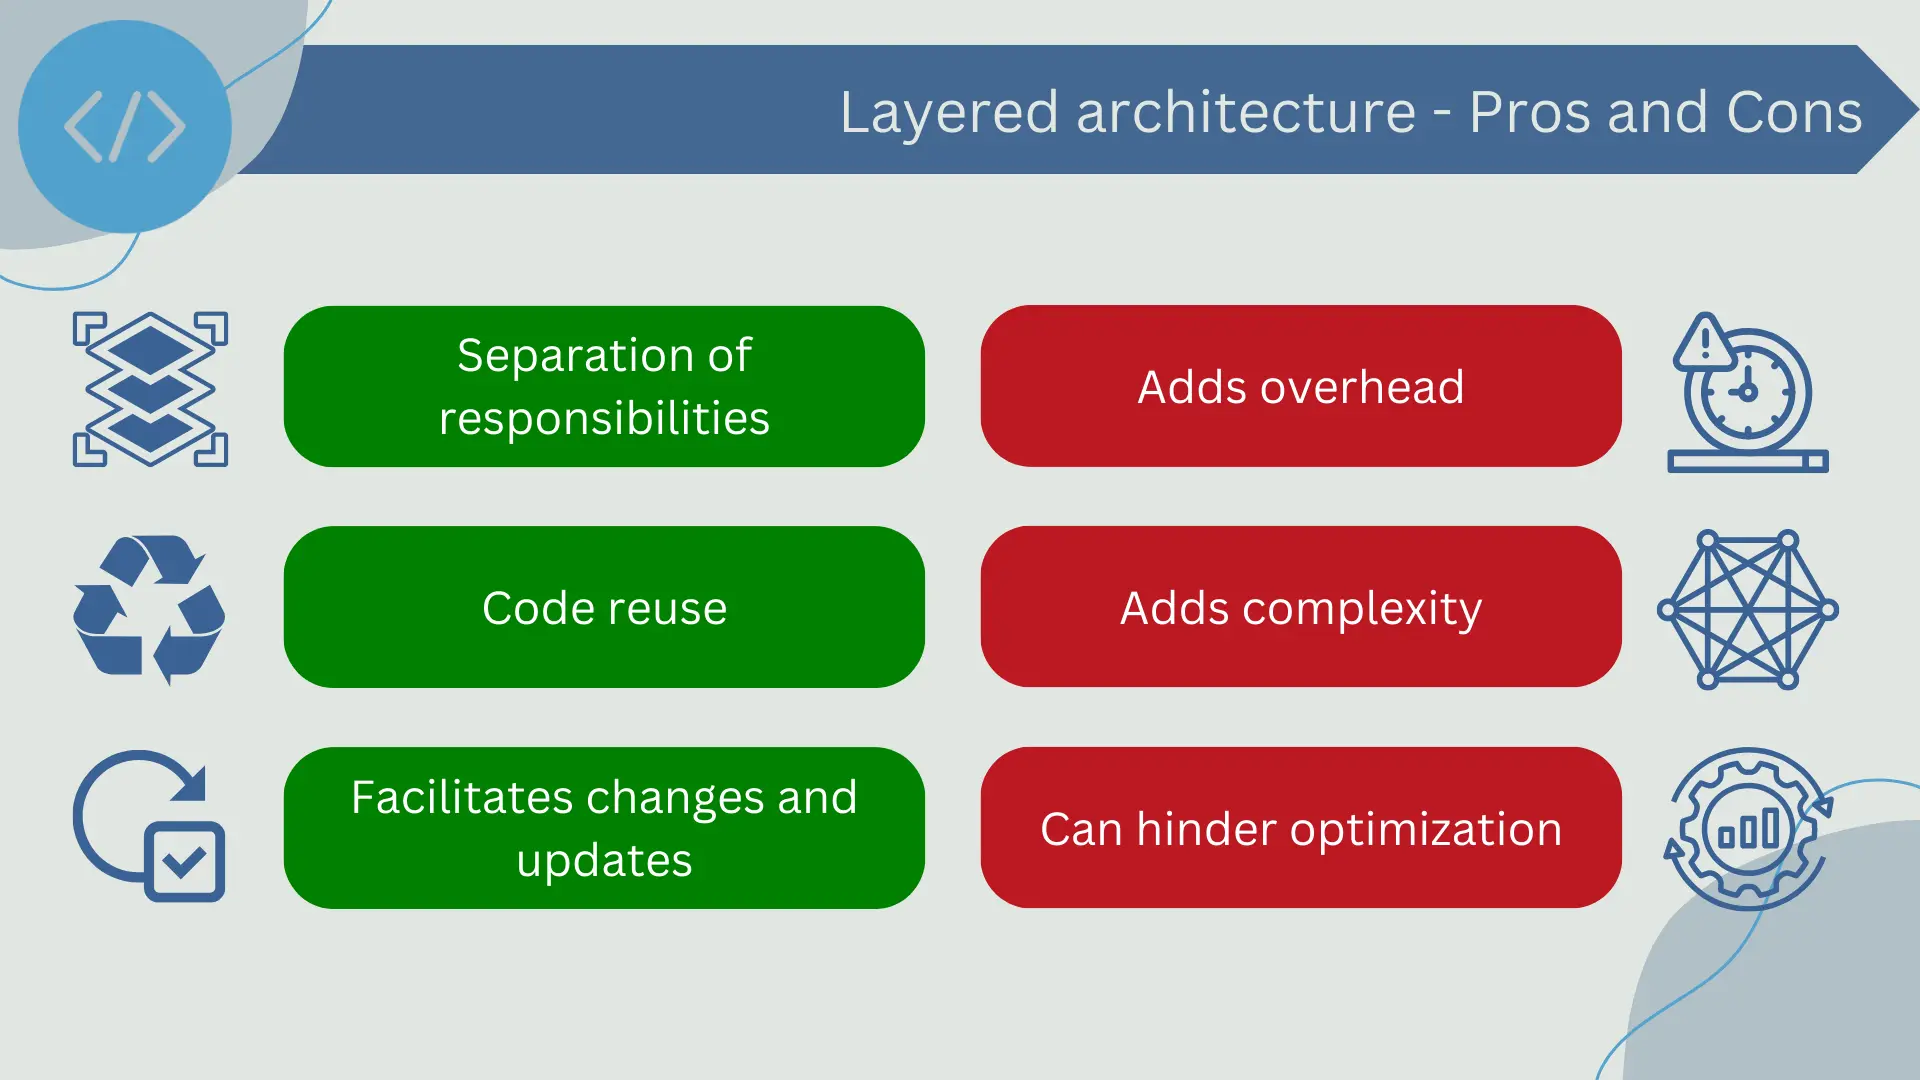 Layered architecture pros and cons